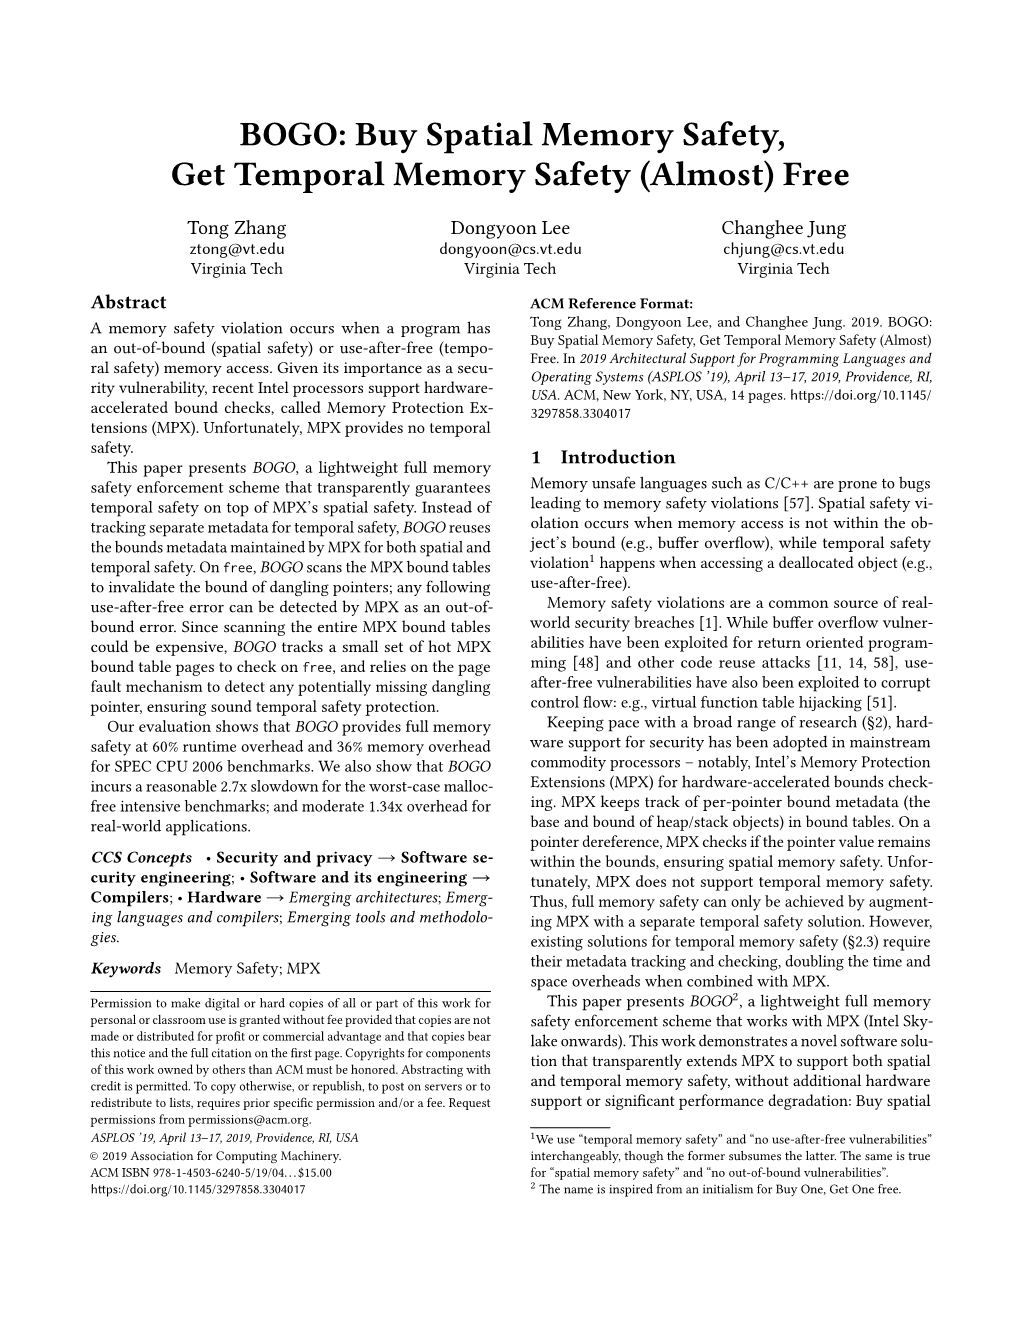 BOGO: Buy Spatial Memory Safety, Get Temporal Memory Safety (Almost) Free